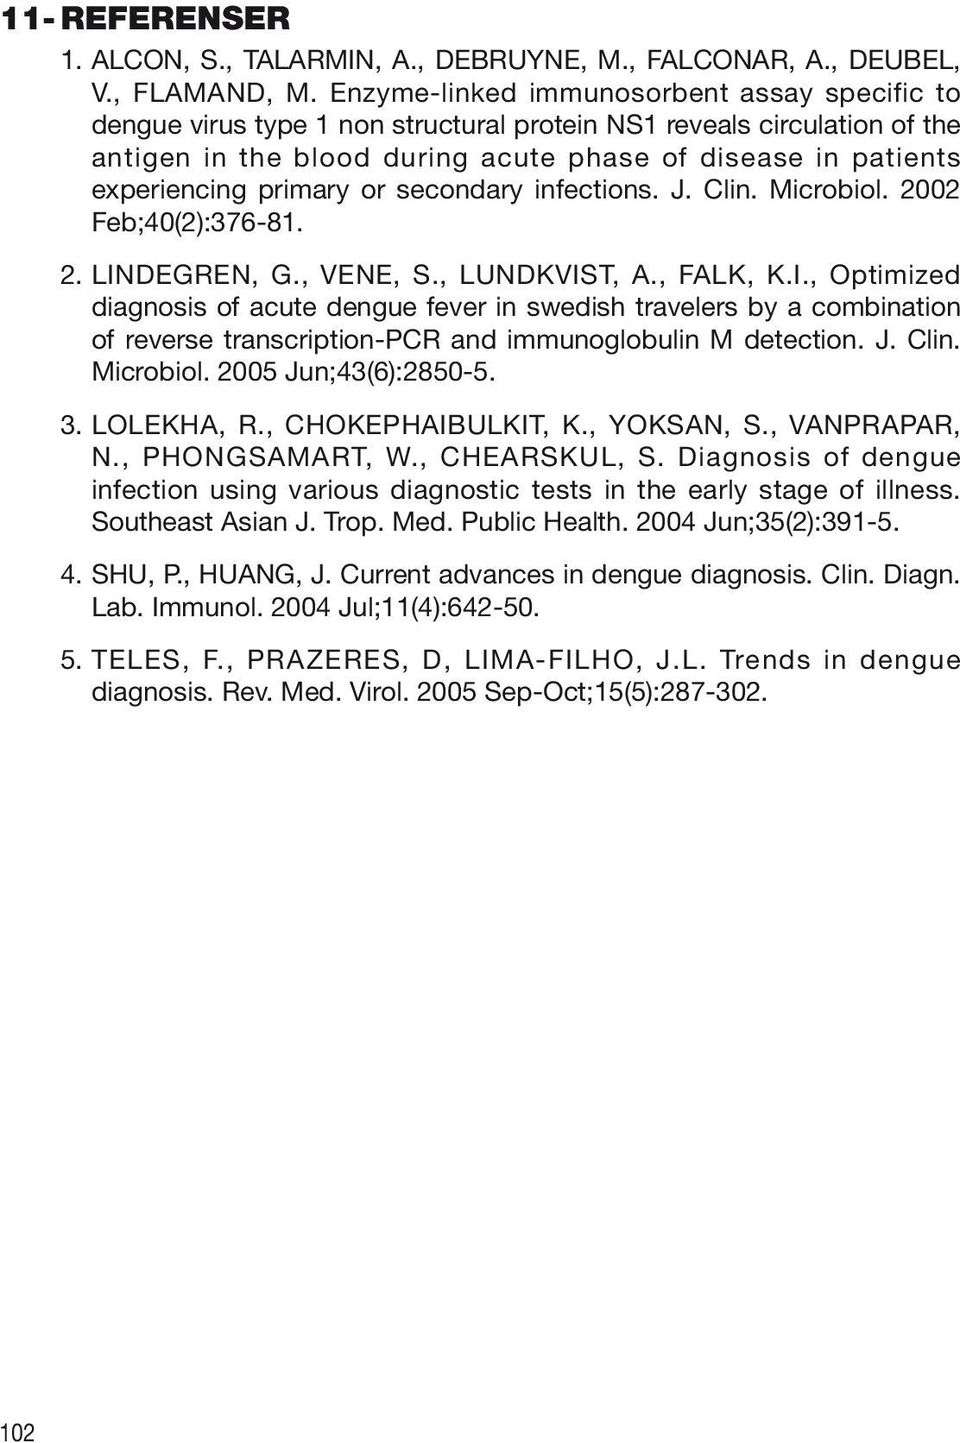 primary or secondary infections. J. Clin. Microbiol. 2002 Feb;40(2):376-81. 2. LIN